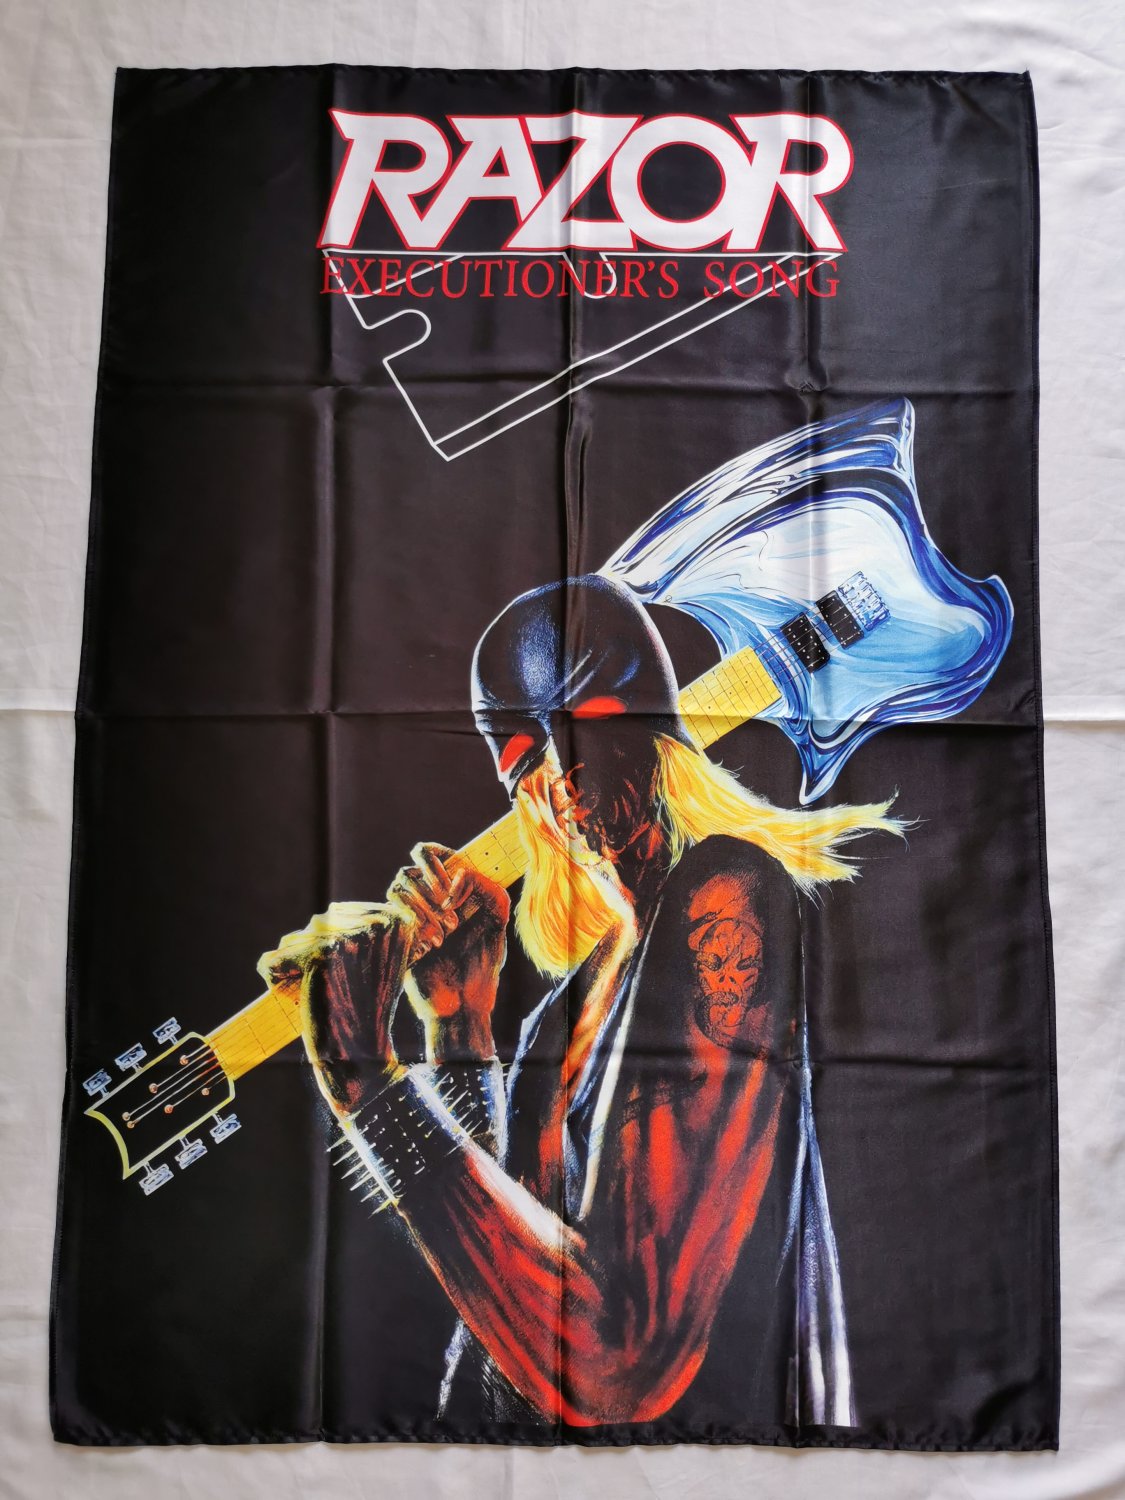 RAZOR - Executioners song FLAG cloth POSTER Banner canadian Thrash METAL